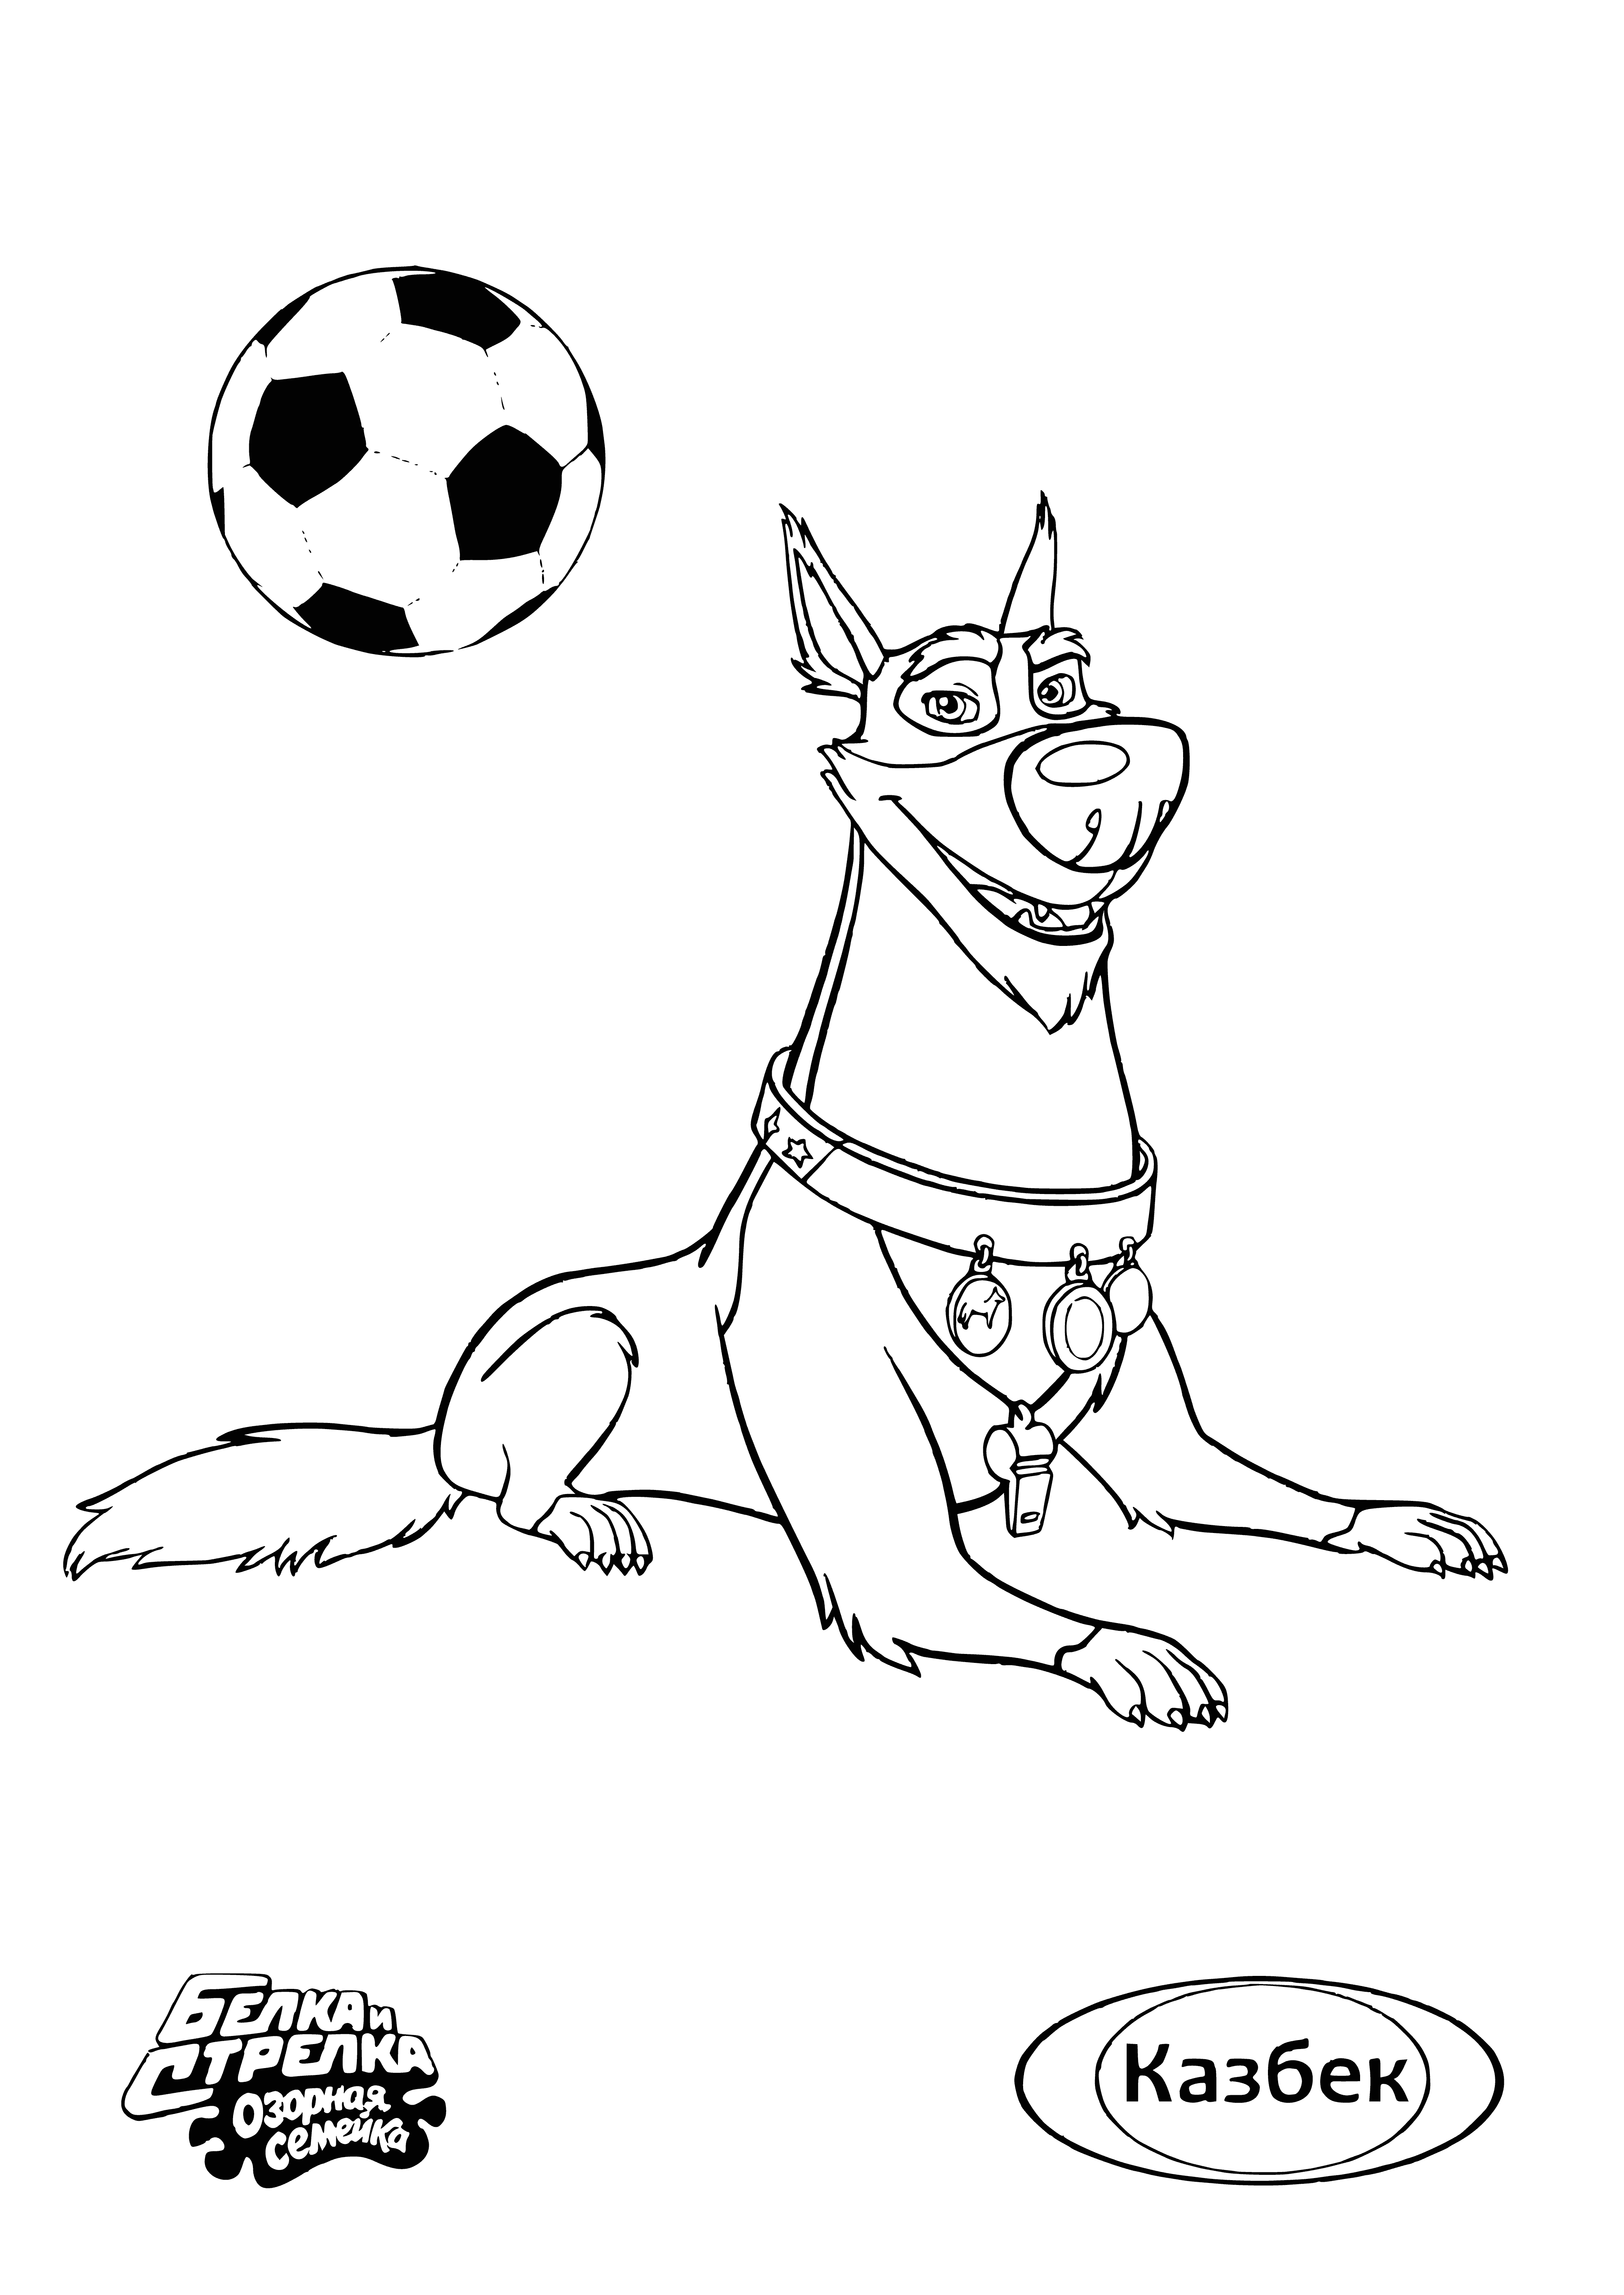 coloring page: Happy shaggy white dog with black spots surrounded by playful brown and white pups, against a mountain landscape.